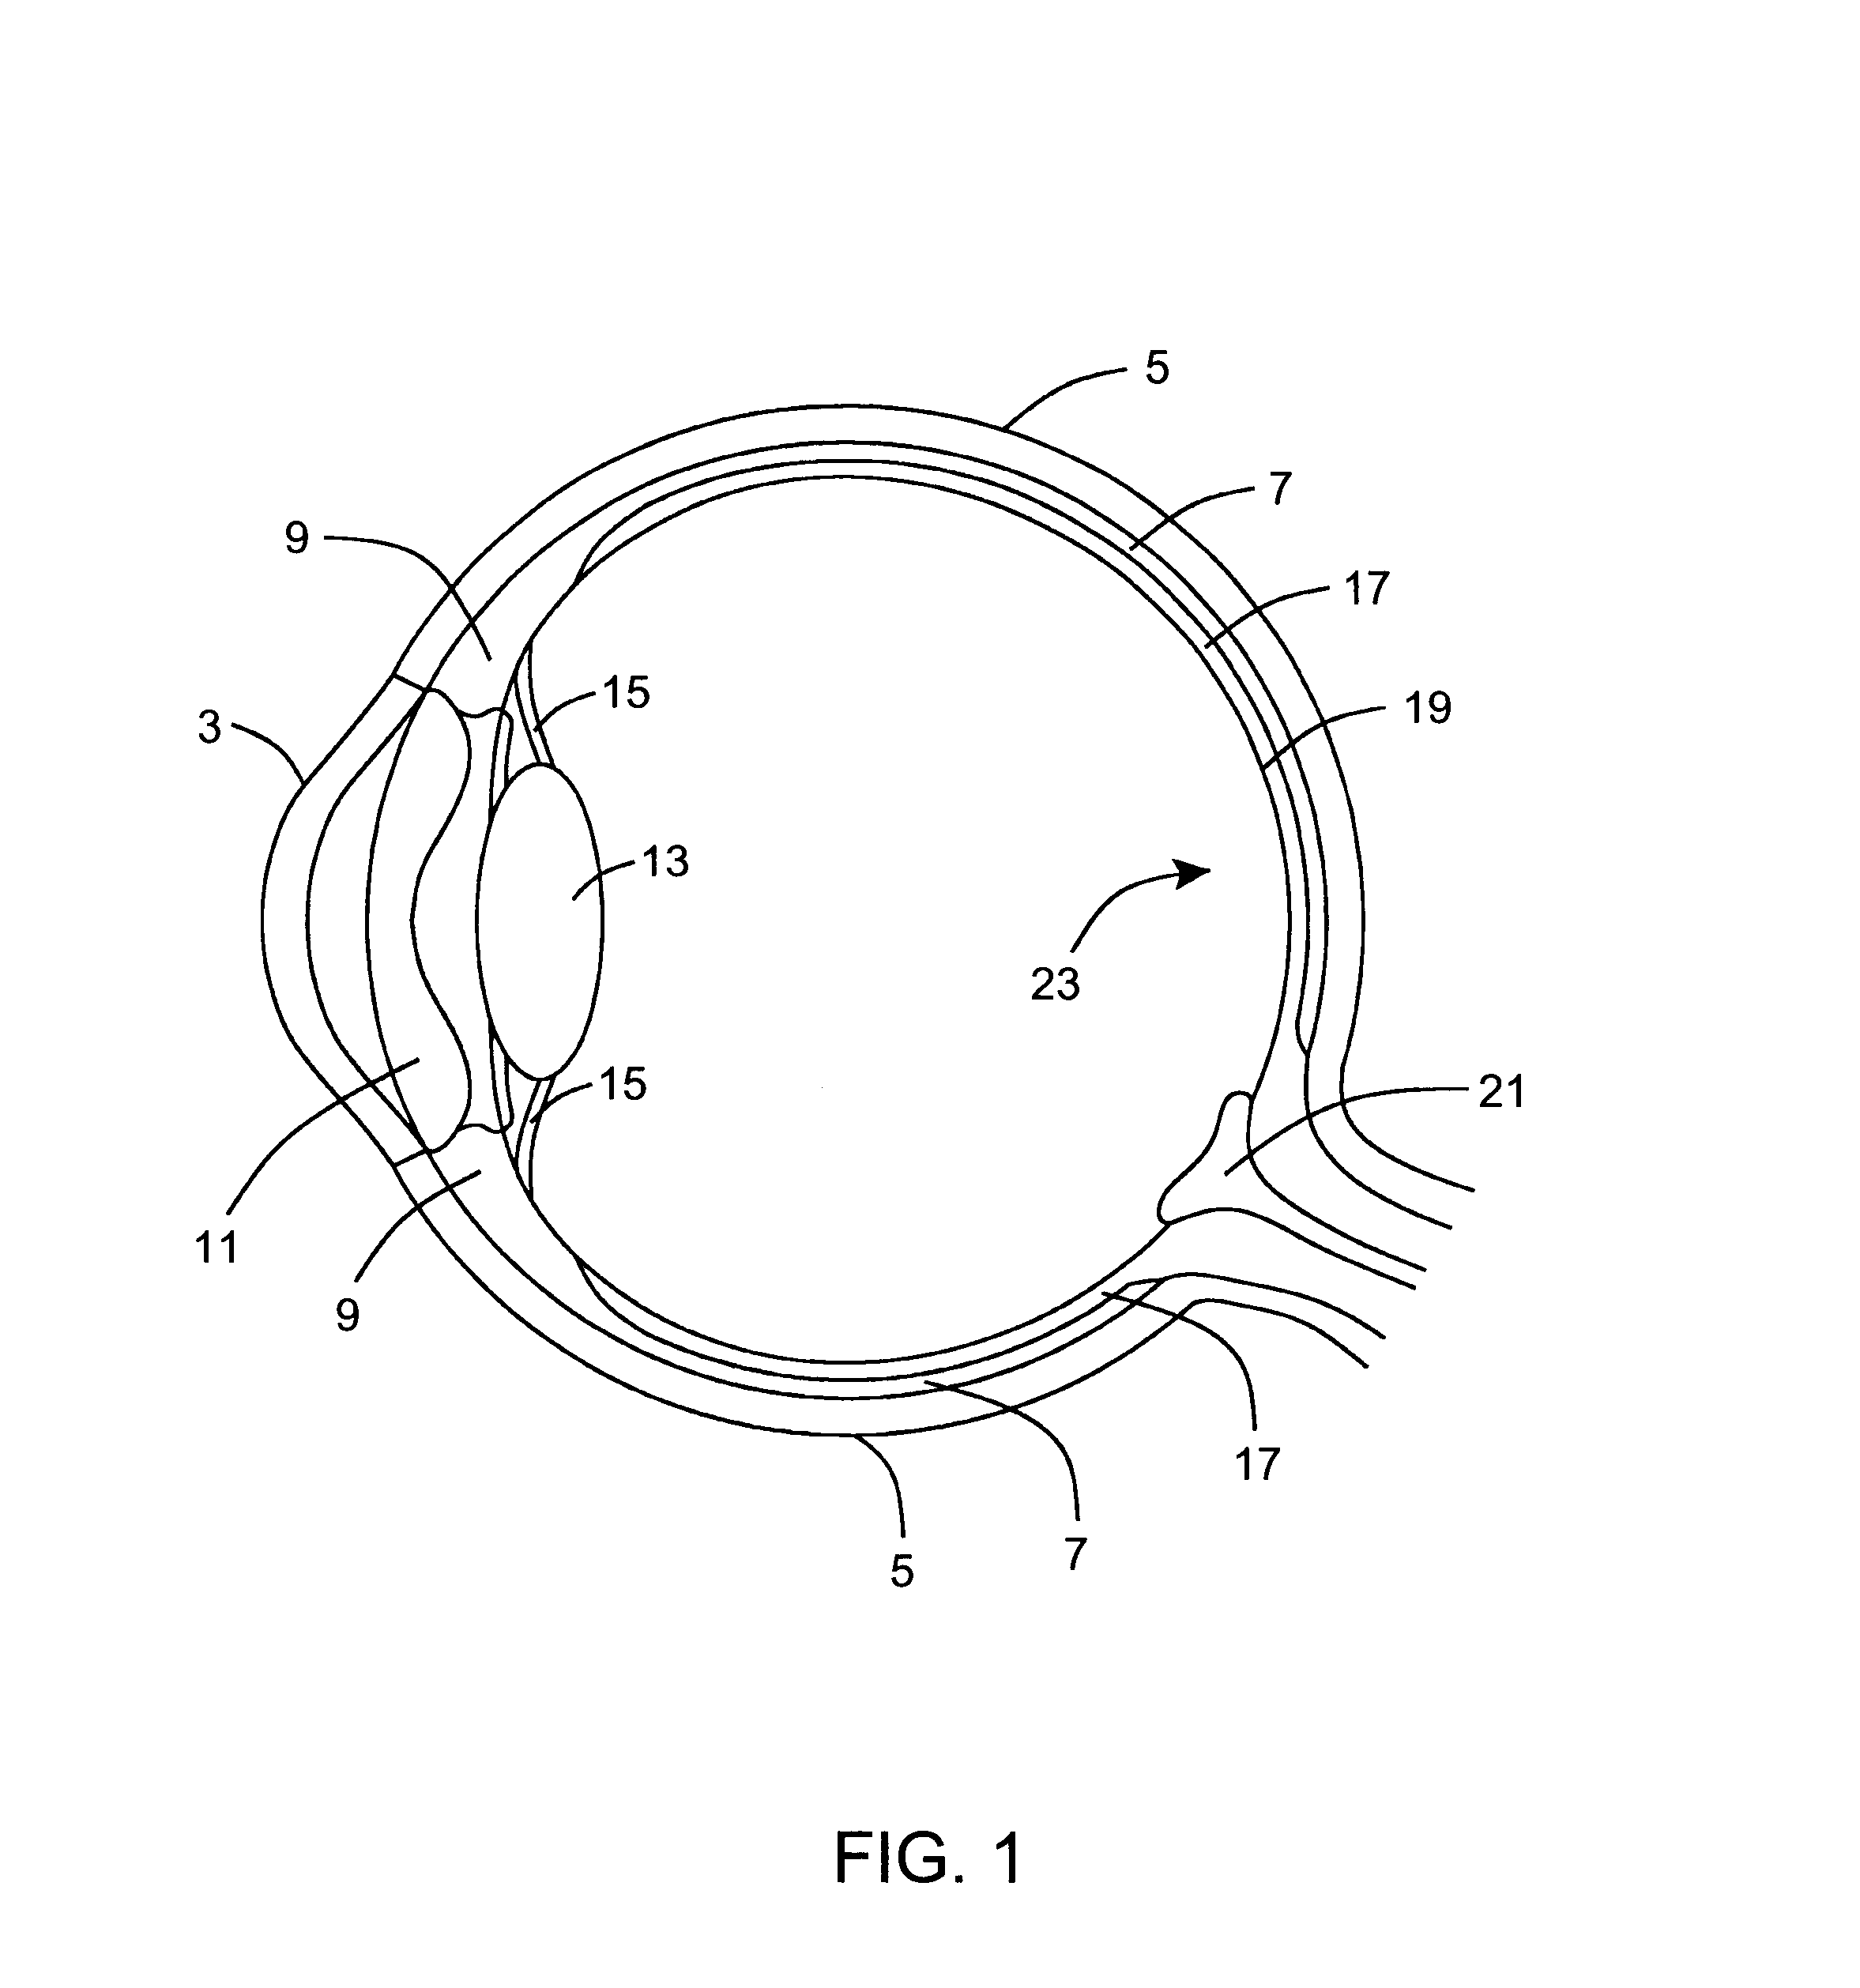 Ophthalmic instrument having an integral wavefront sensor and display device that displays a graphical representation of high order aberrations of the human eye measured by the wavefront sensor